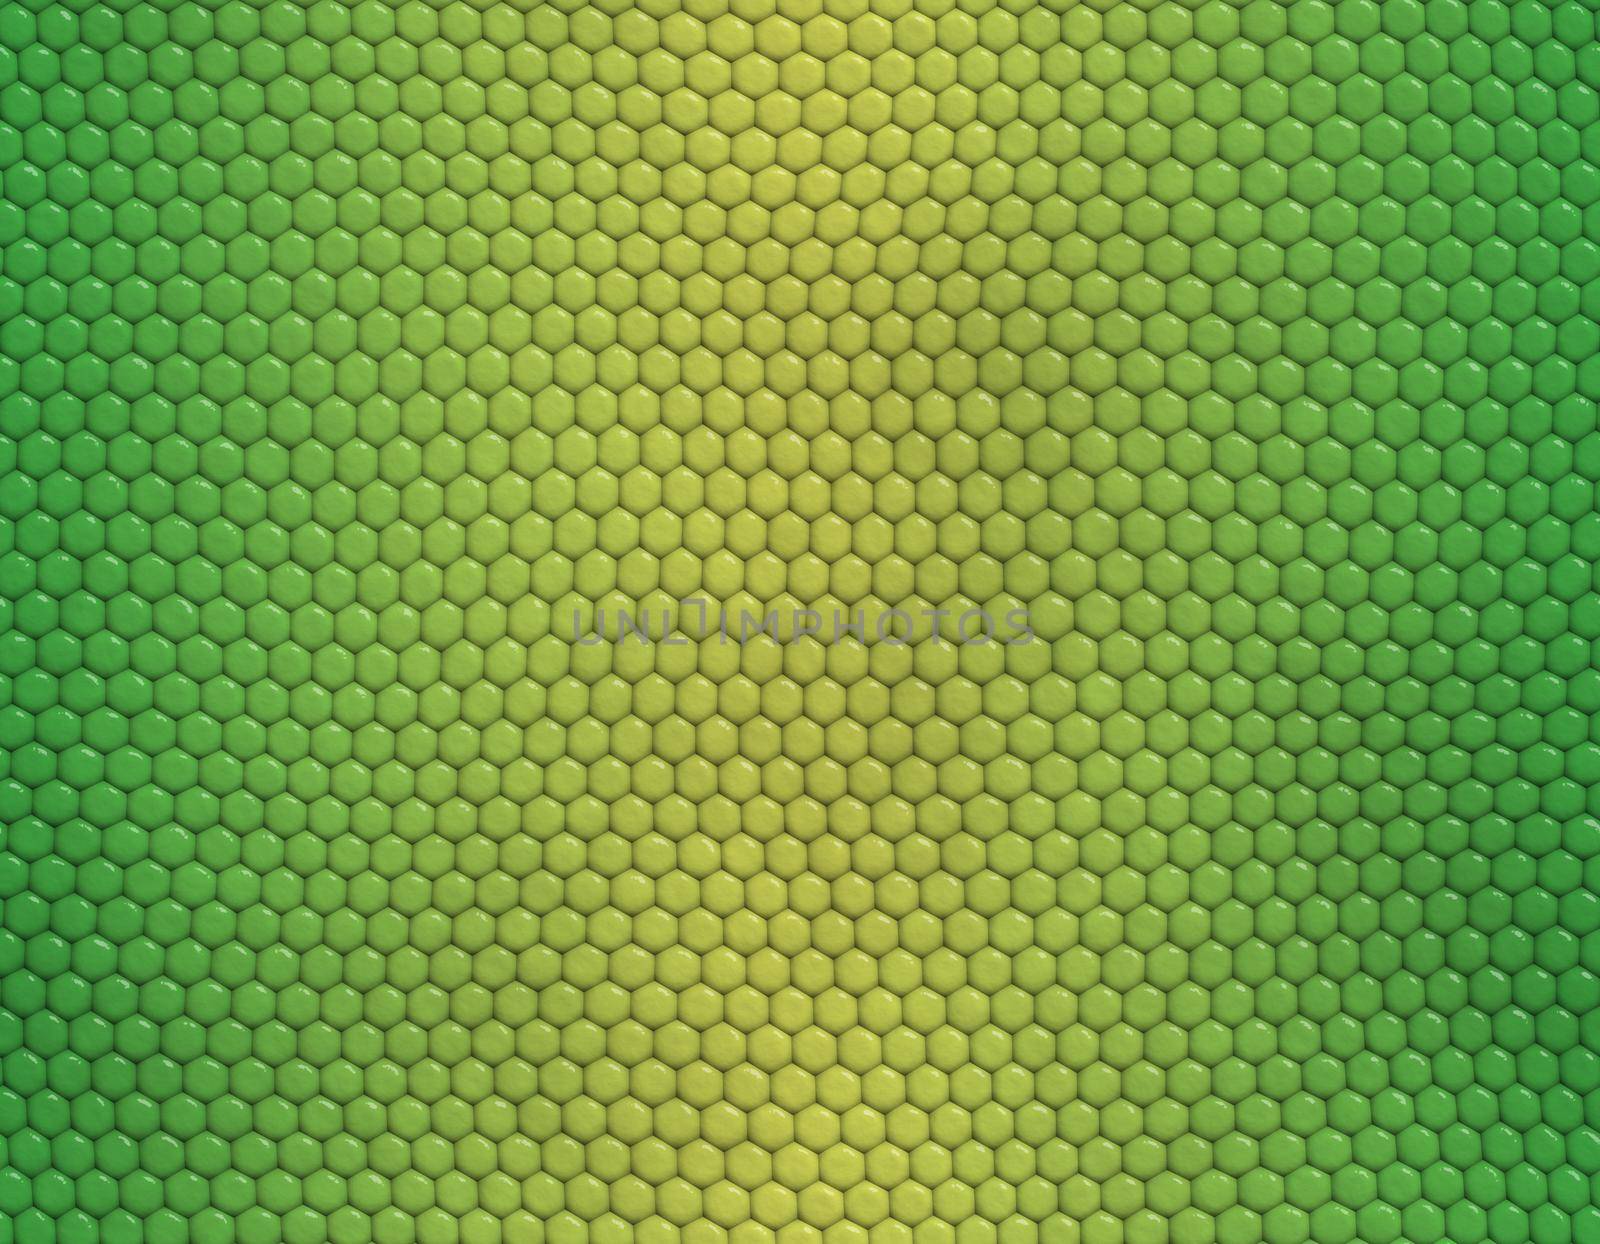 Yellow and green gradient snake skin pattern, hexagonal scale by Bezdnatm